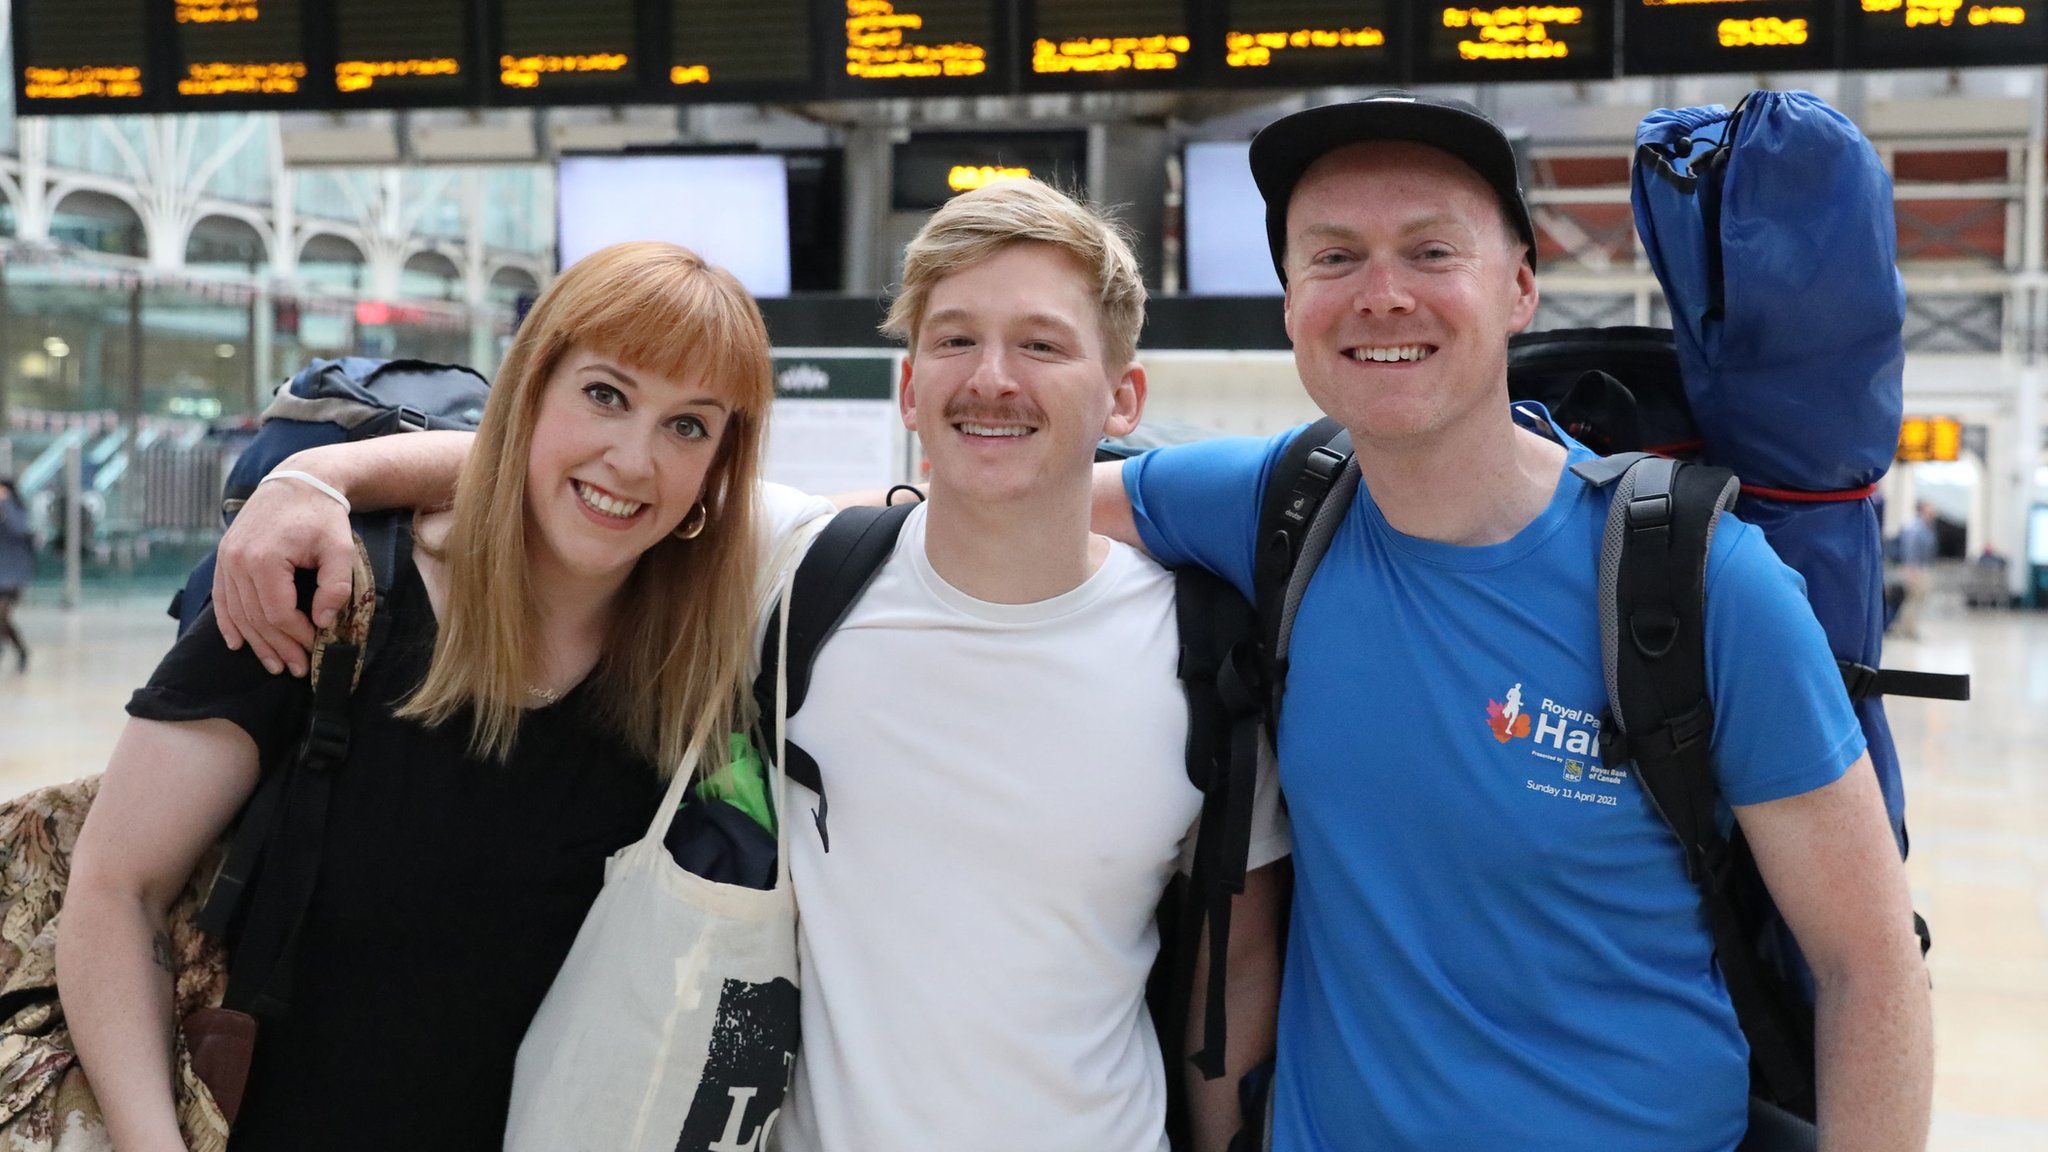 Becky Moriarty, Jared Hill And Rory Leighton In Paddington Station In London, They Are Travelling By Train To The Glastonbury Festival